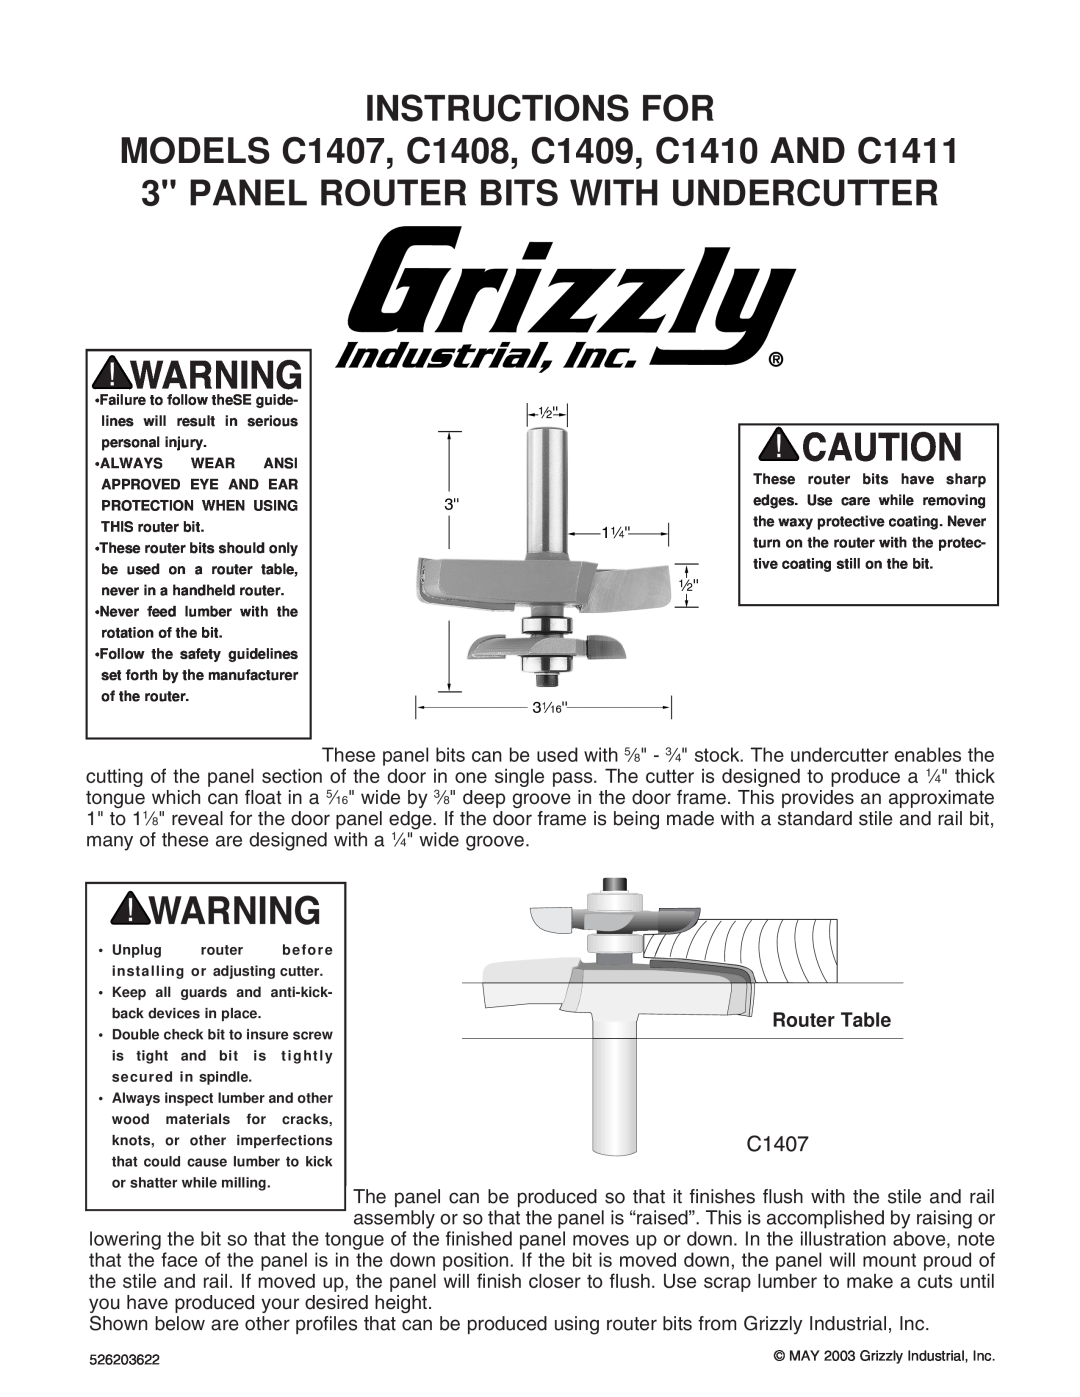 Grizzly C1407 manual Instructions For, Router Table 